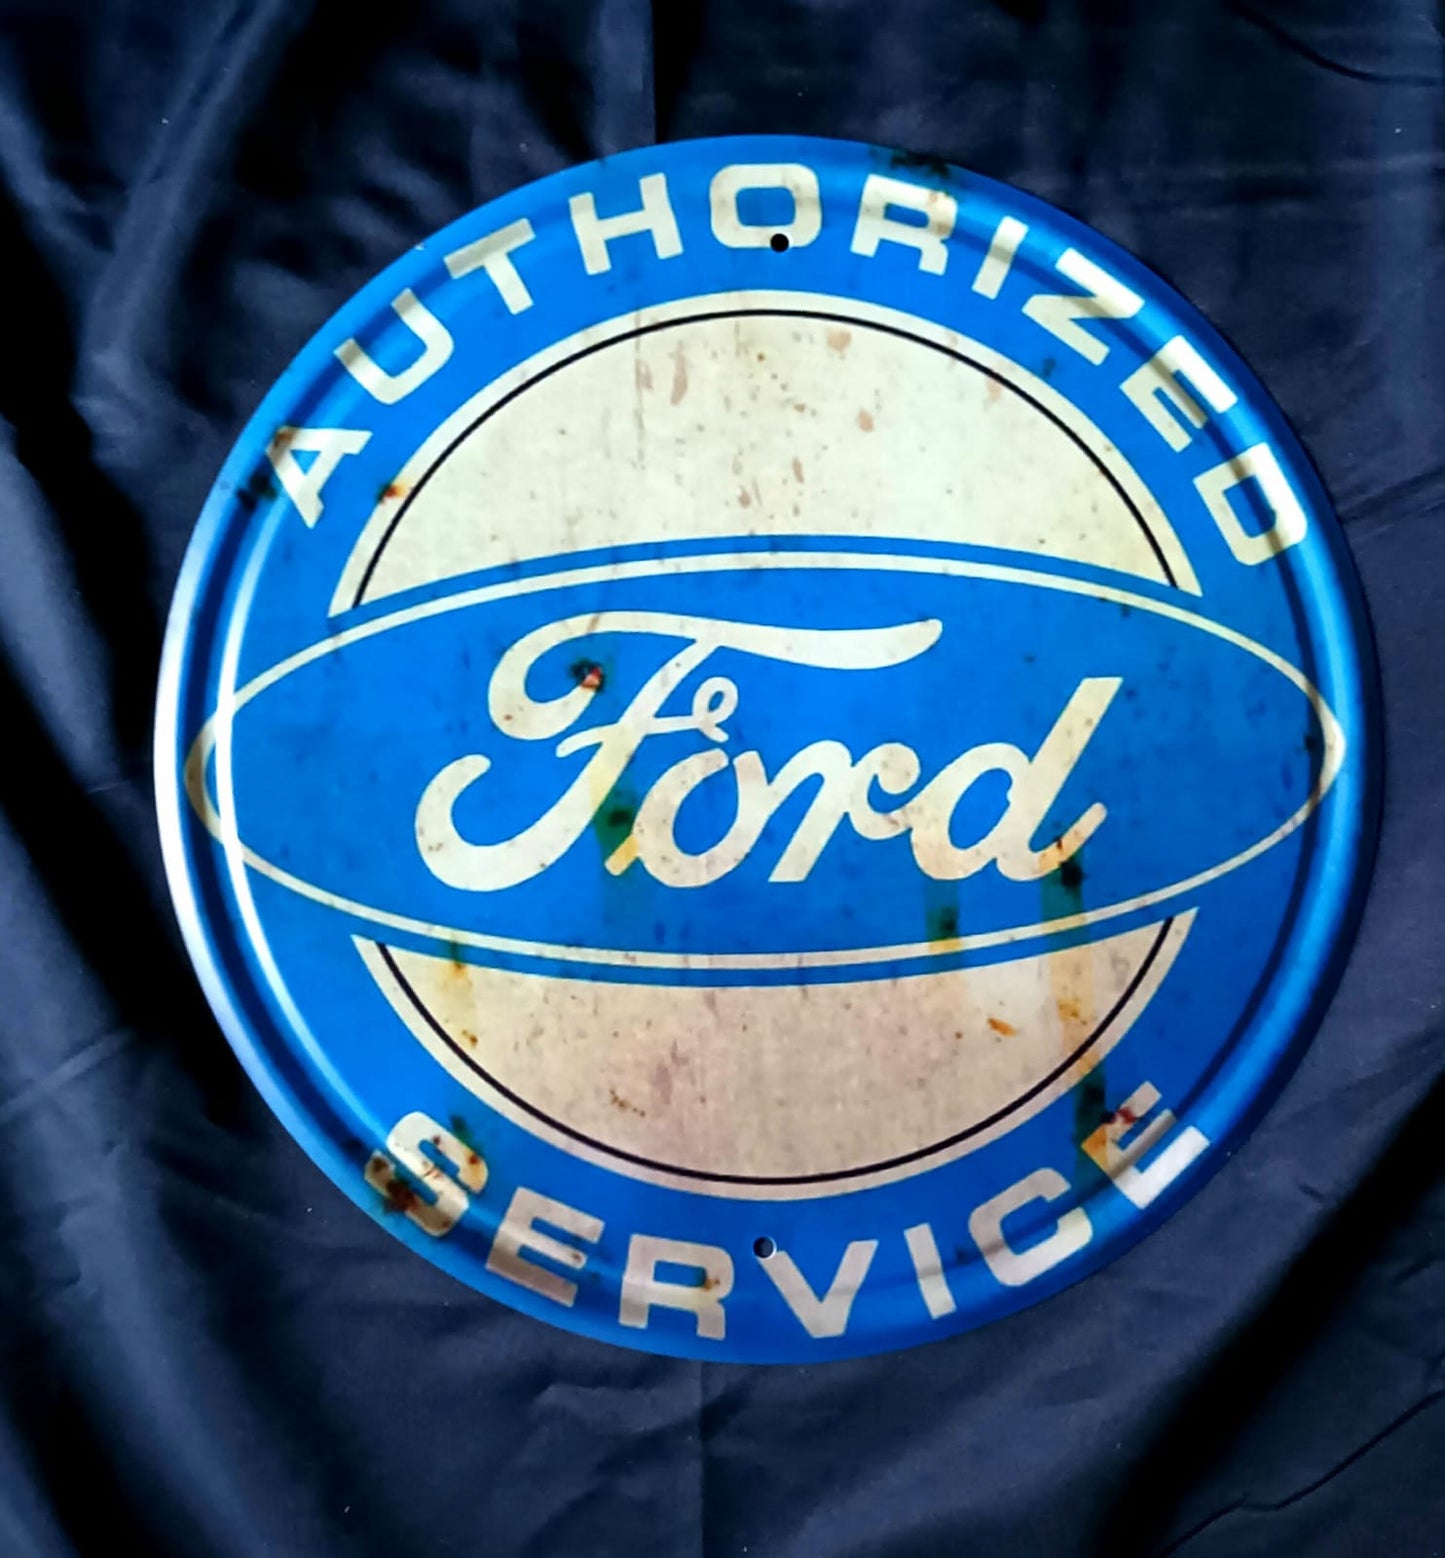 Blechschild "Authorized FORD Service"